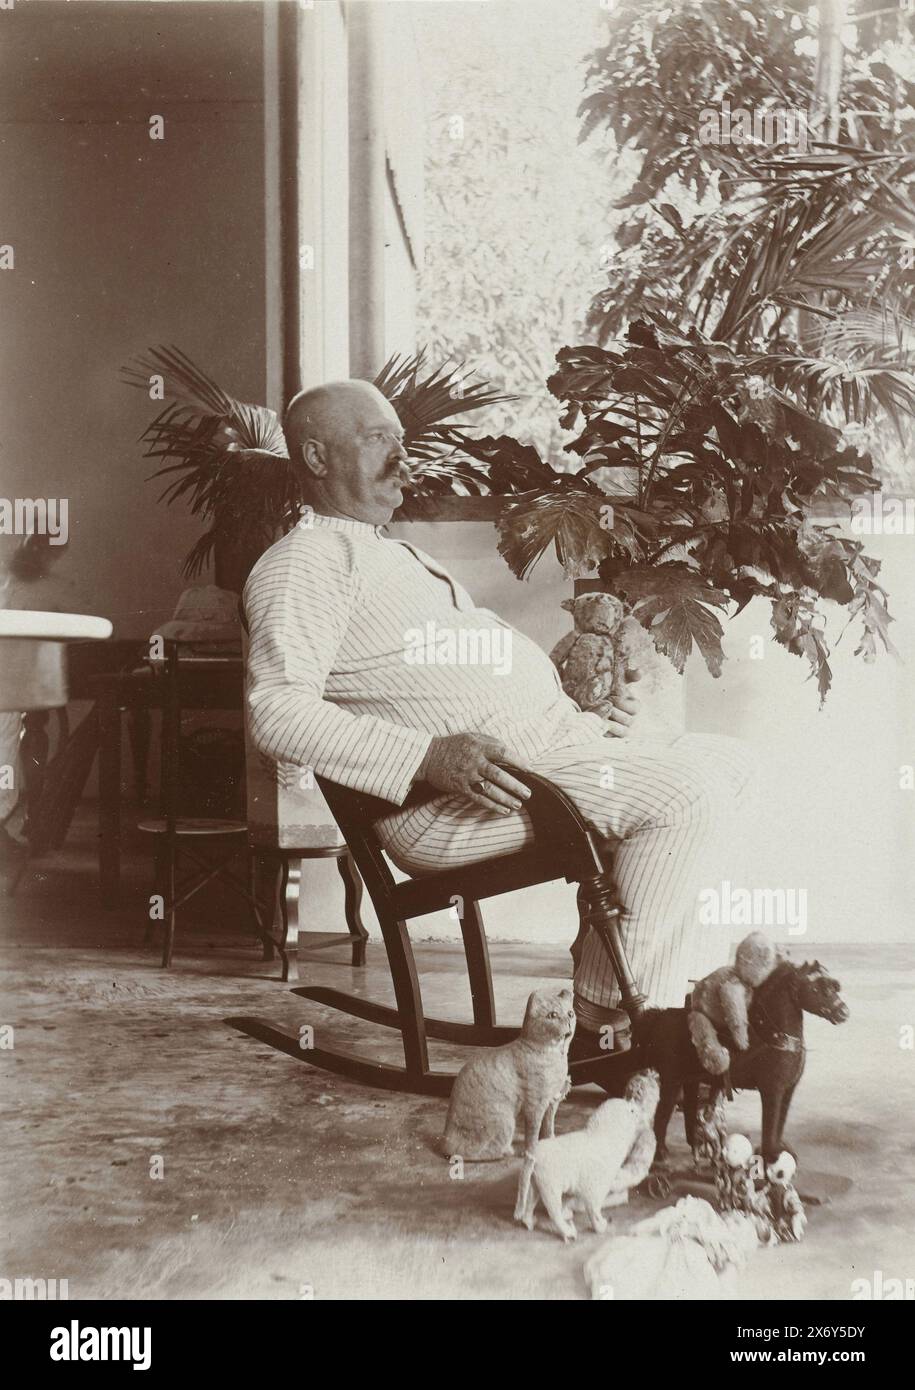 Man in his pajamas in the rocking chair on the veranda surrounded by toy animals., Banjoewangi 1910 (title on object), Photographies (series title), The men wear white tropical uniforms, one man with a pith helmet, two other men wear a straw hat, the women wear white dresses or batik skirts with white vests. Photo from album 'Photographies'., photograph, Frits Freerks Fontein Fz., (attributed to), Frits Freerks Fontein Fz., (attributed to), Madura, (possibly), Netherlands, (possibly), c. 1910, cardboard, height, 57 mm × width, 128 mm, height, 242 mm × width, 333 mm Stock Photo